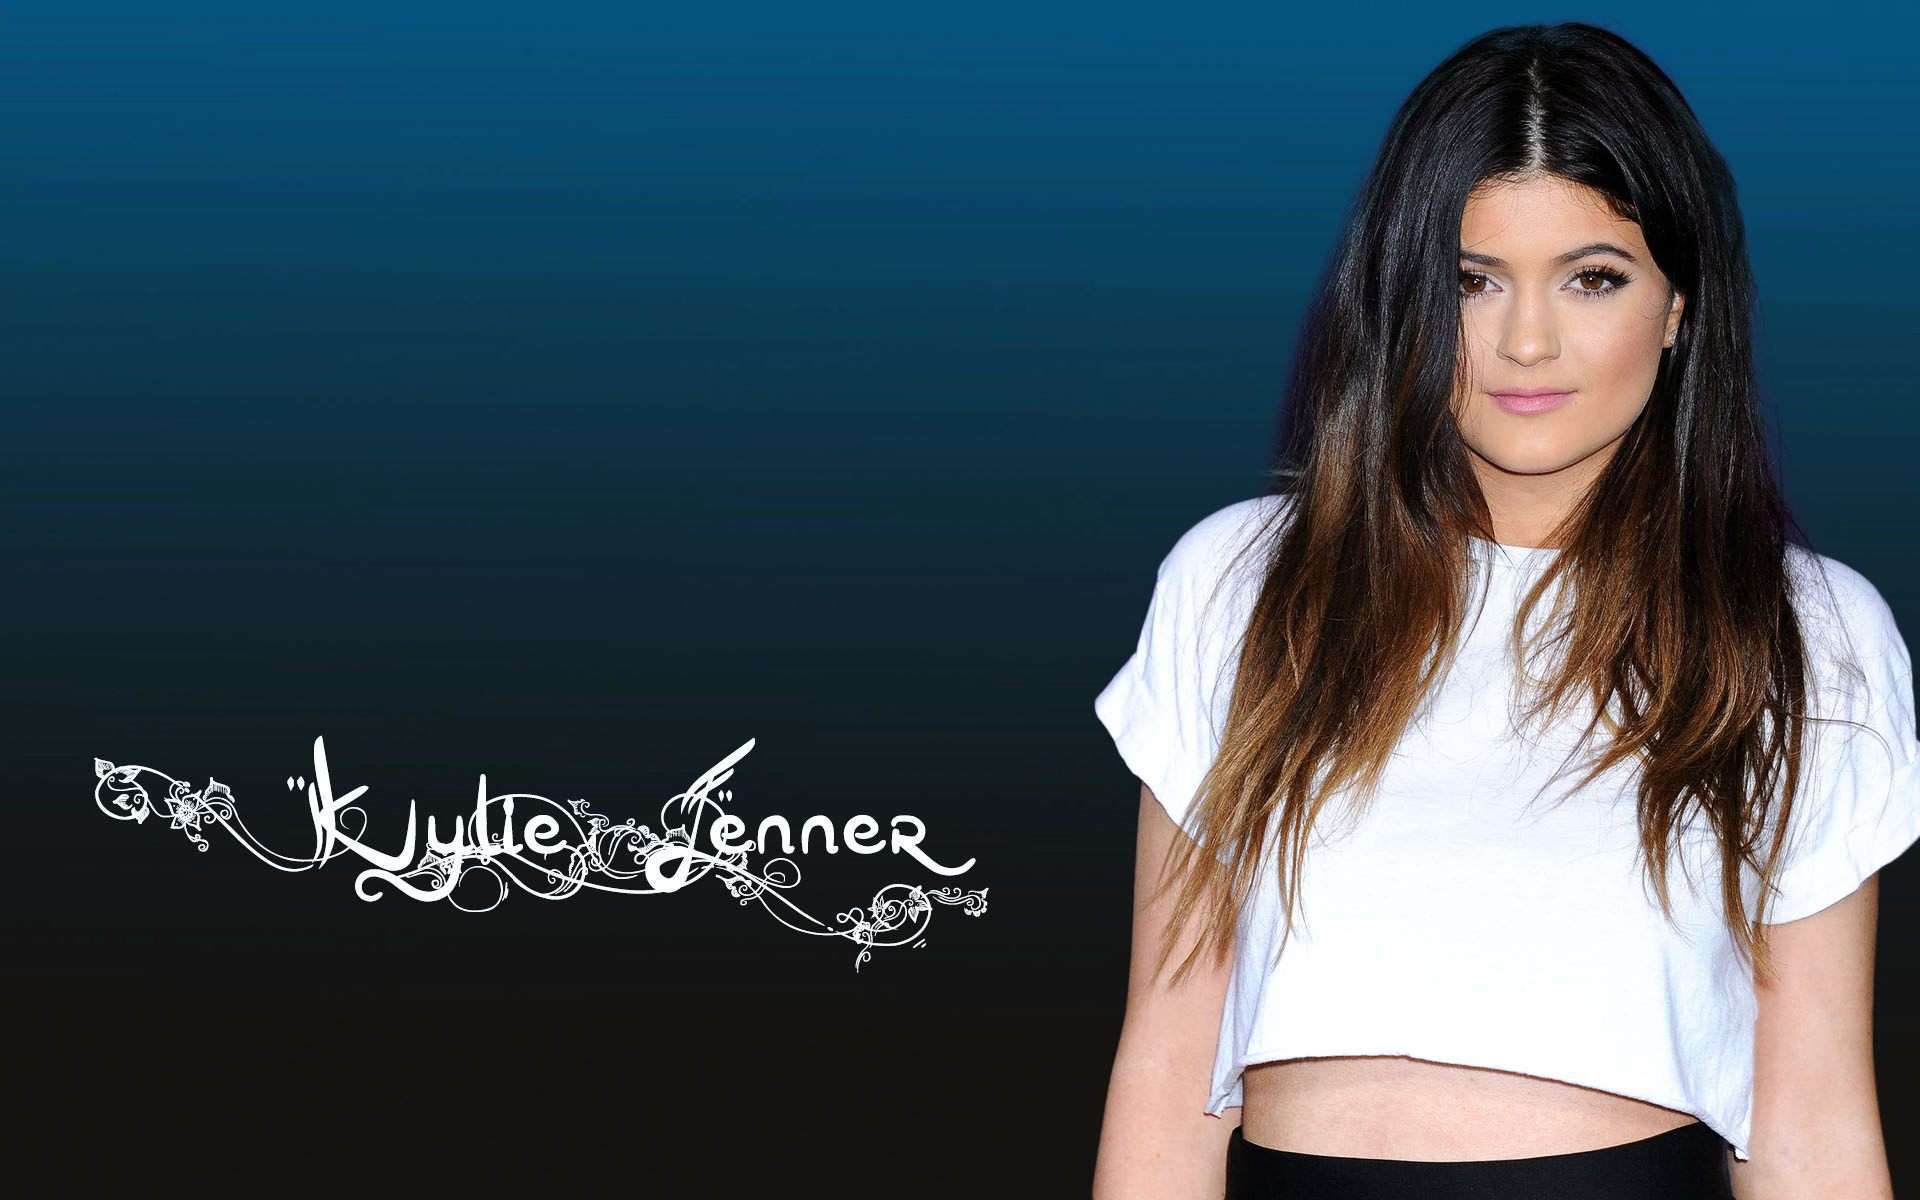 Kylie Jenner Wallpaper High Resolution and Quality Download